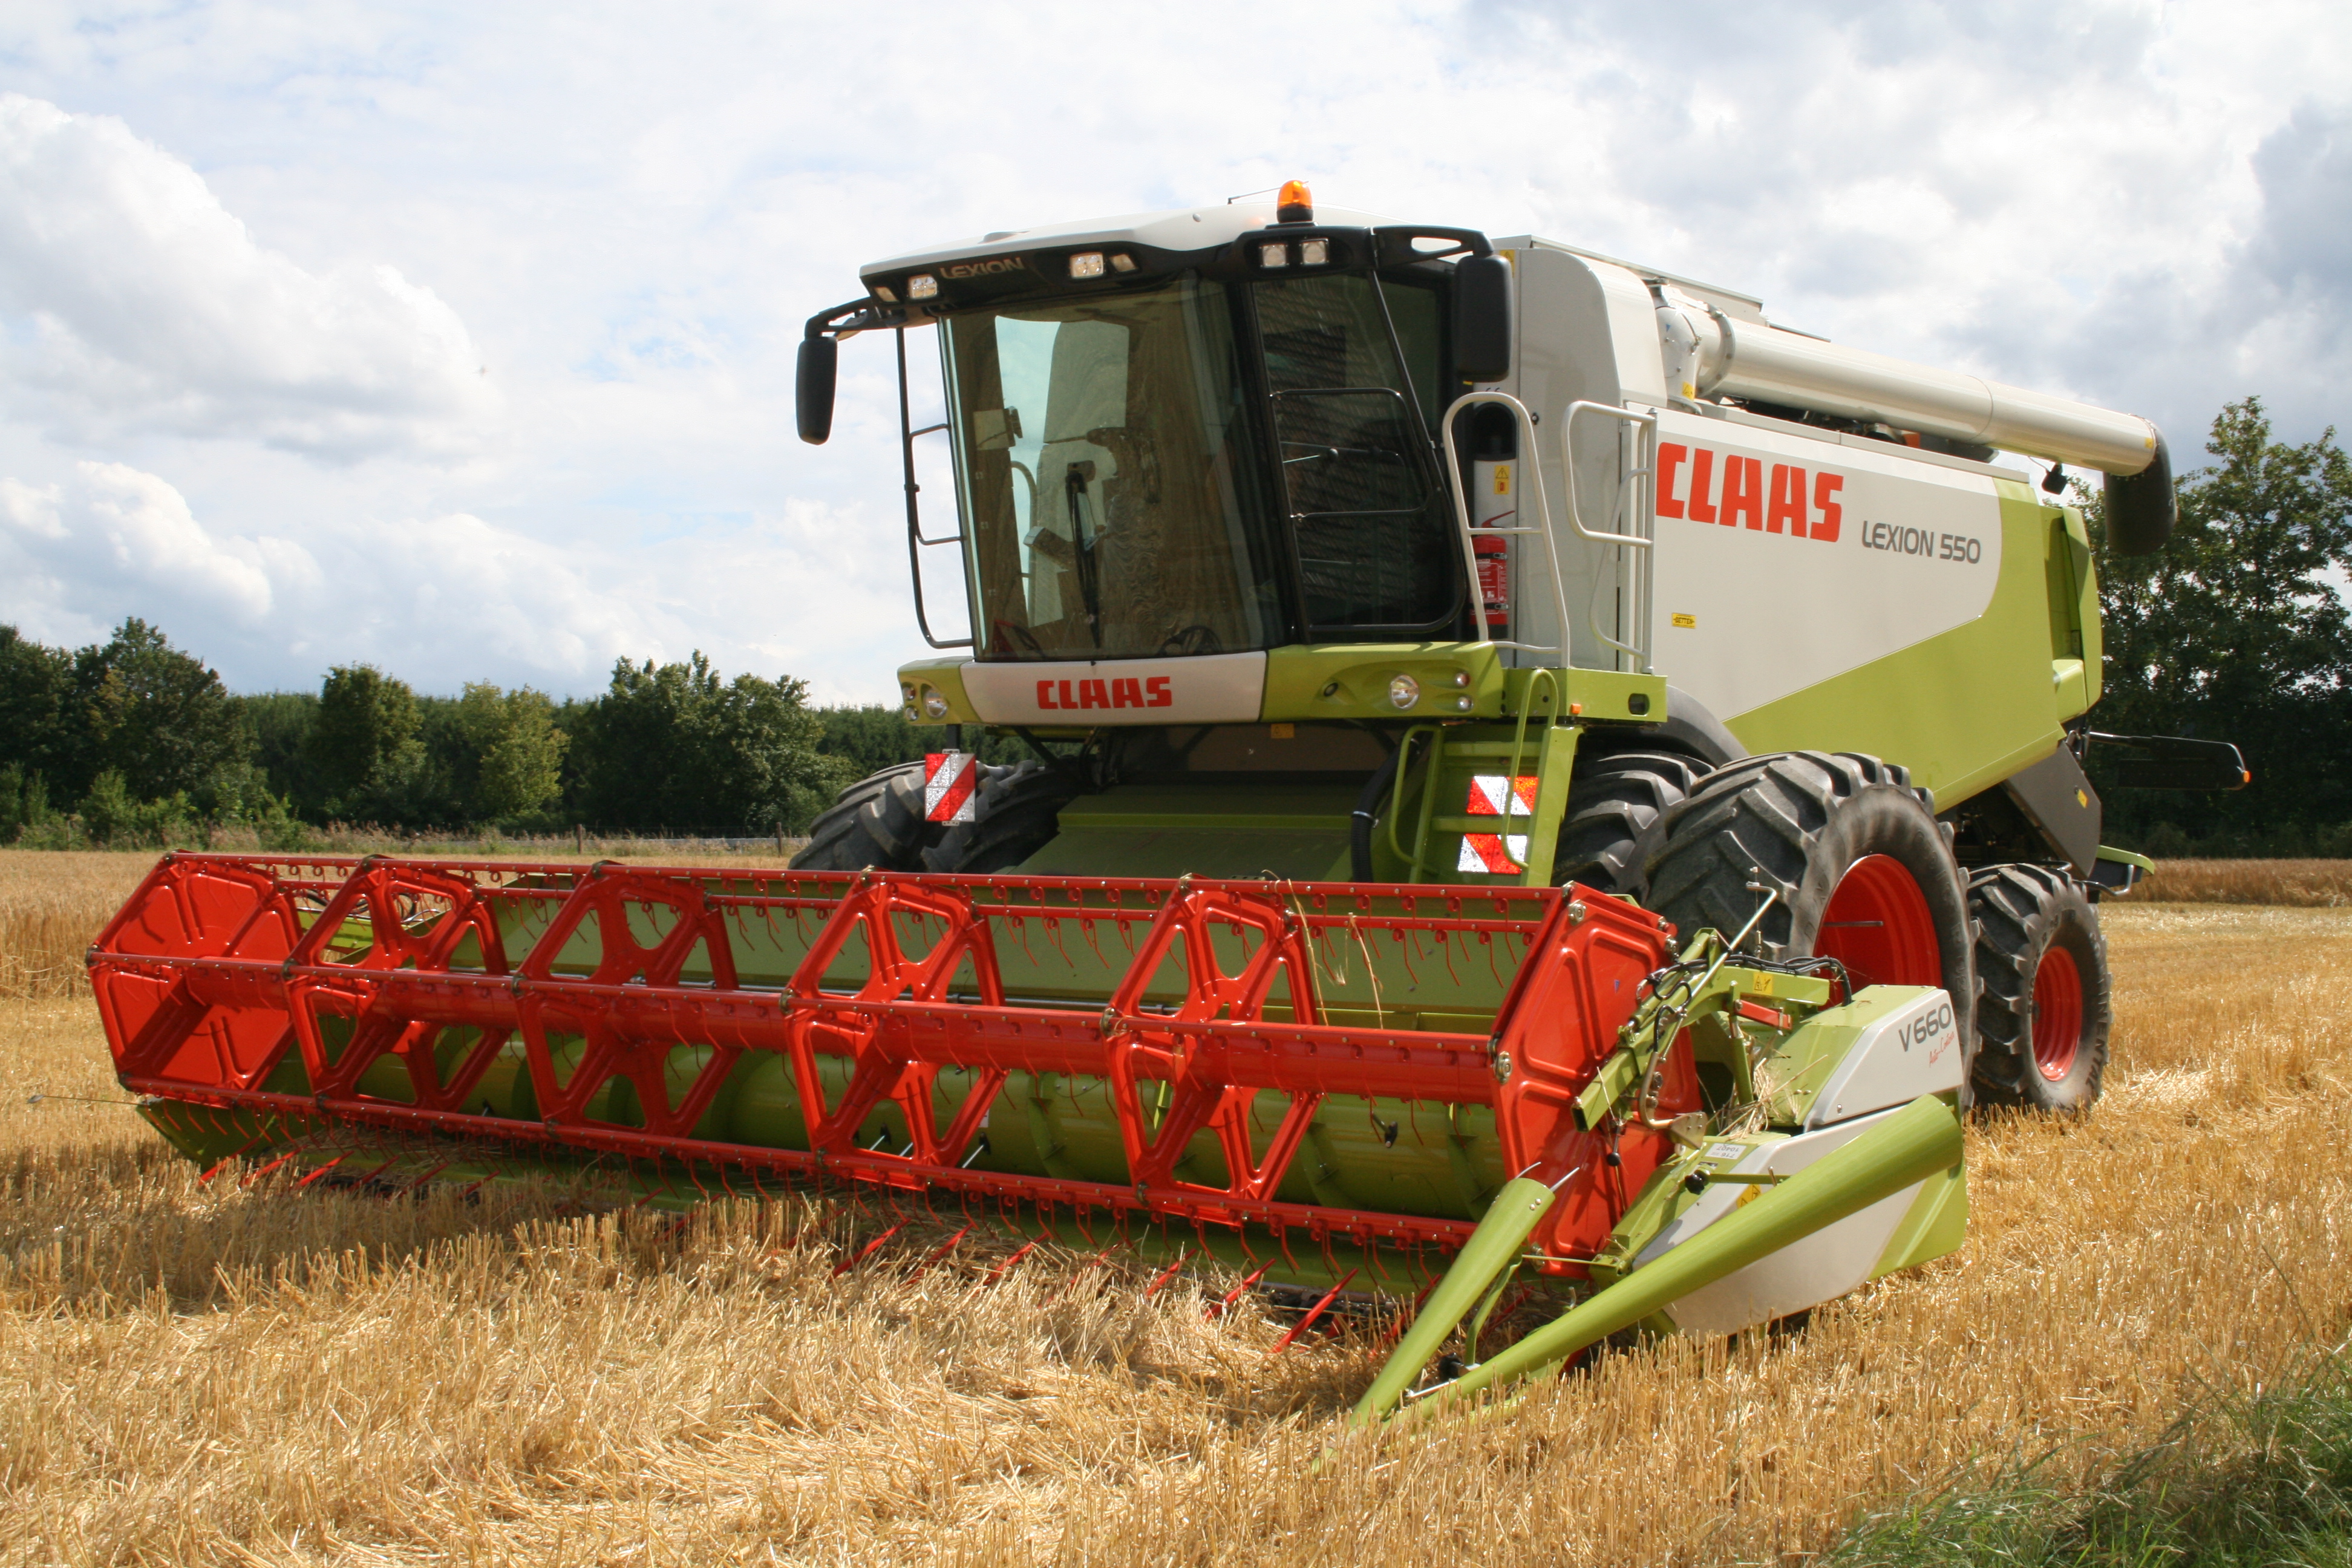 Hd Quality Wallpaper - Claas Lexion 590 , HD Wallpaper & Backgrounds